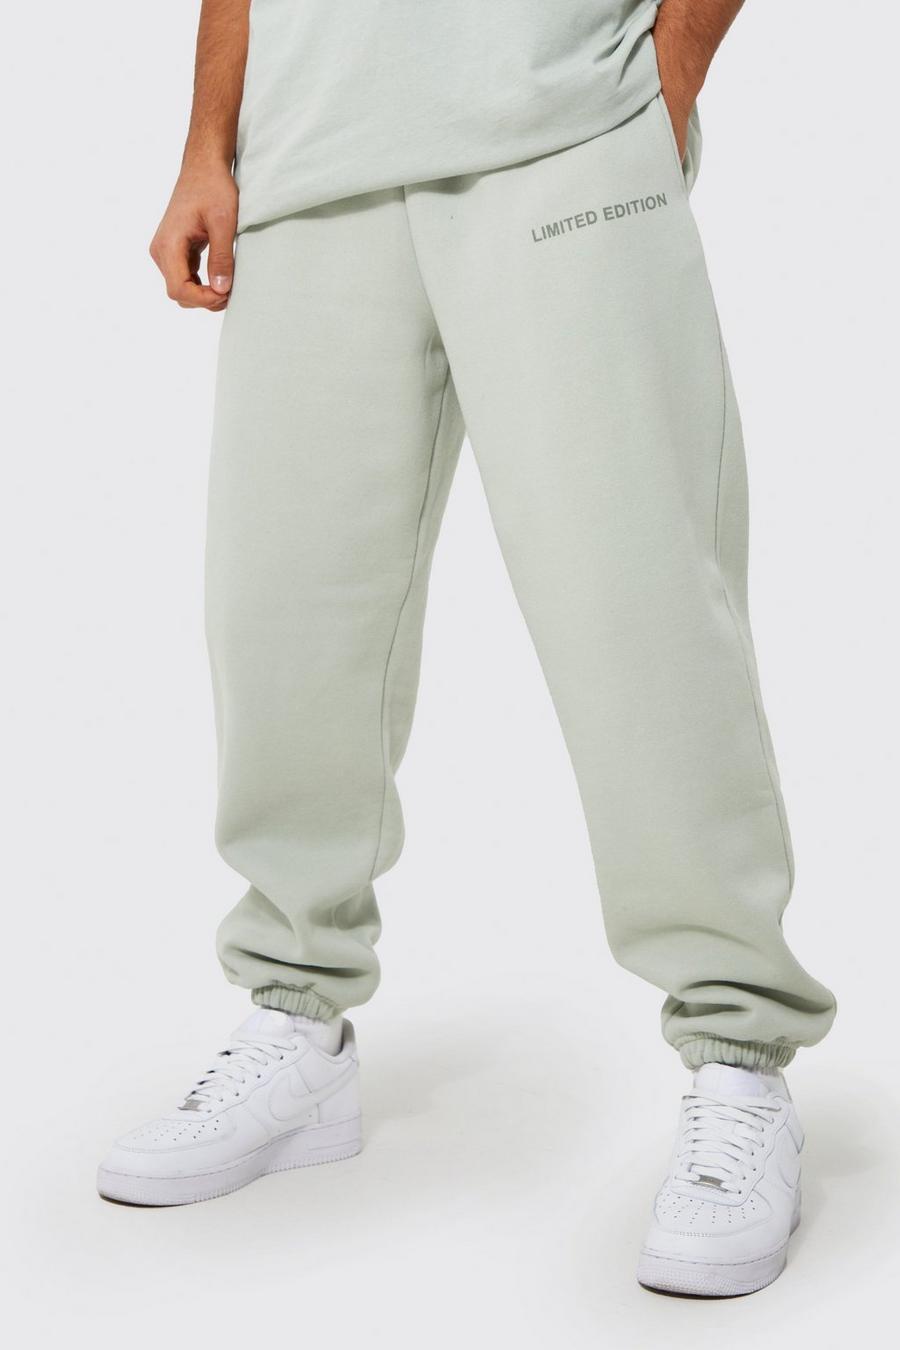 Limited Edition Loose Fit Jogger